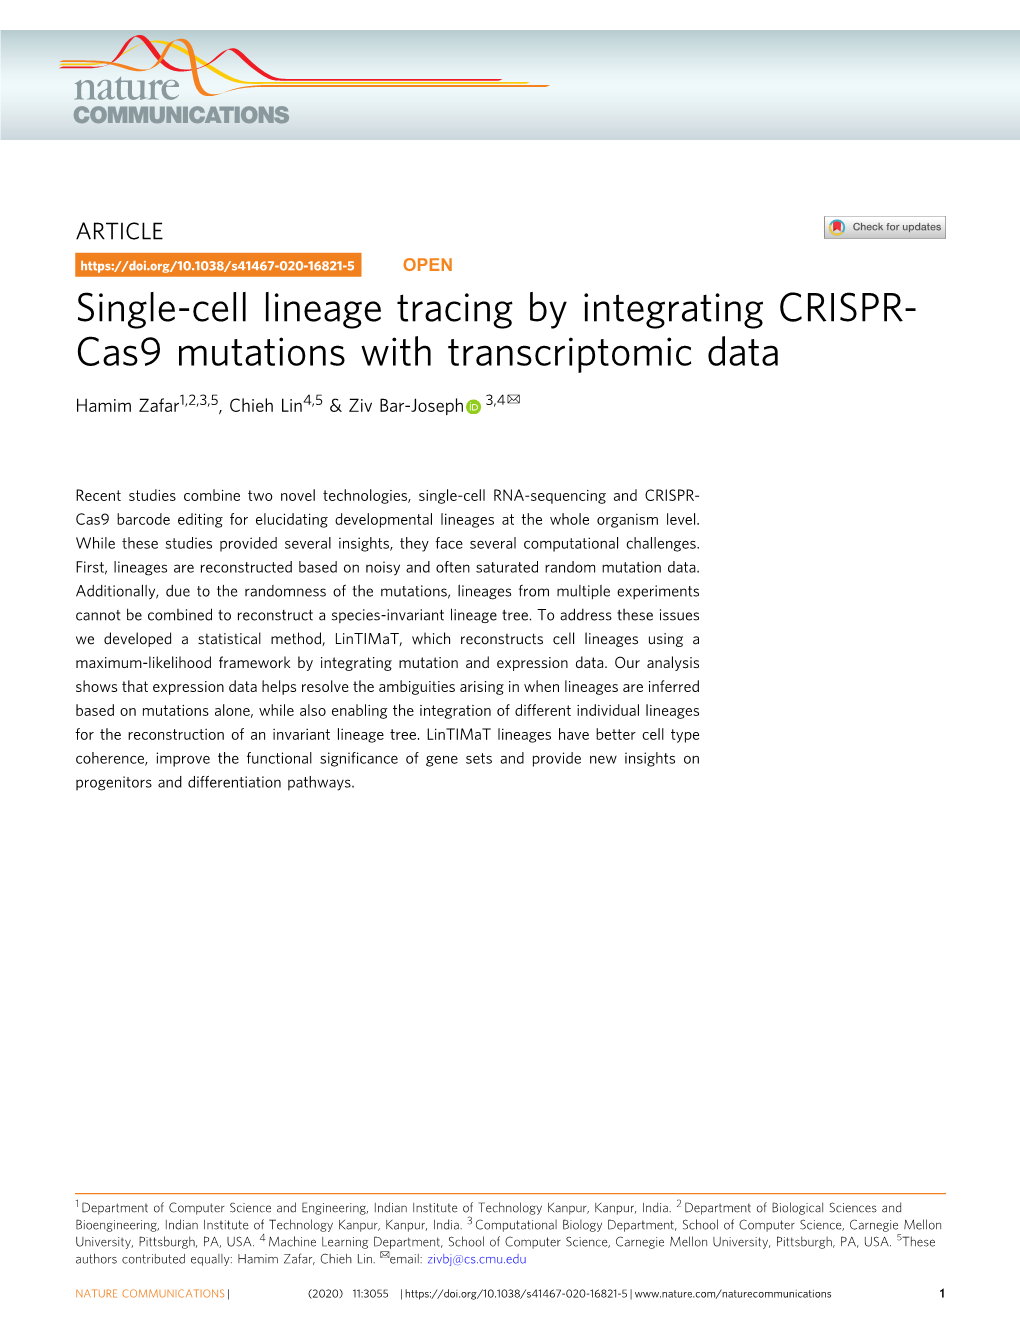 Single-Cell Lineage Tracing by Integrating CRISPR-Cas9